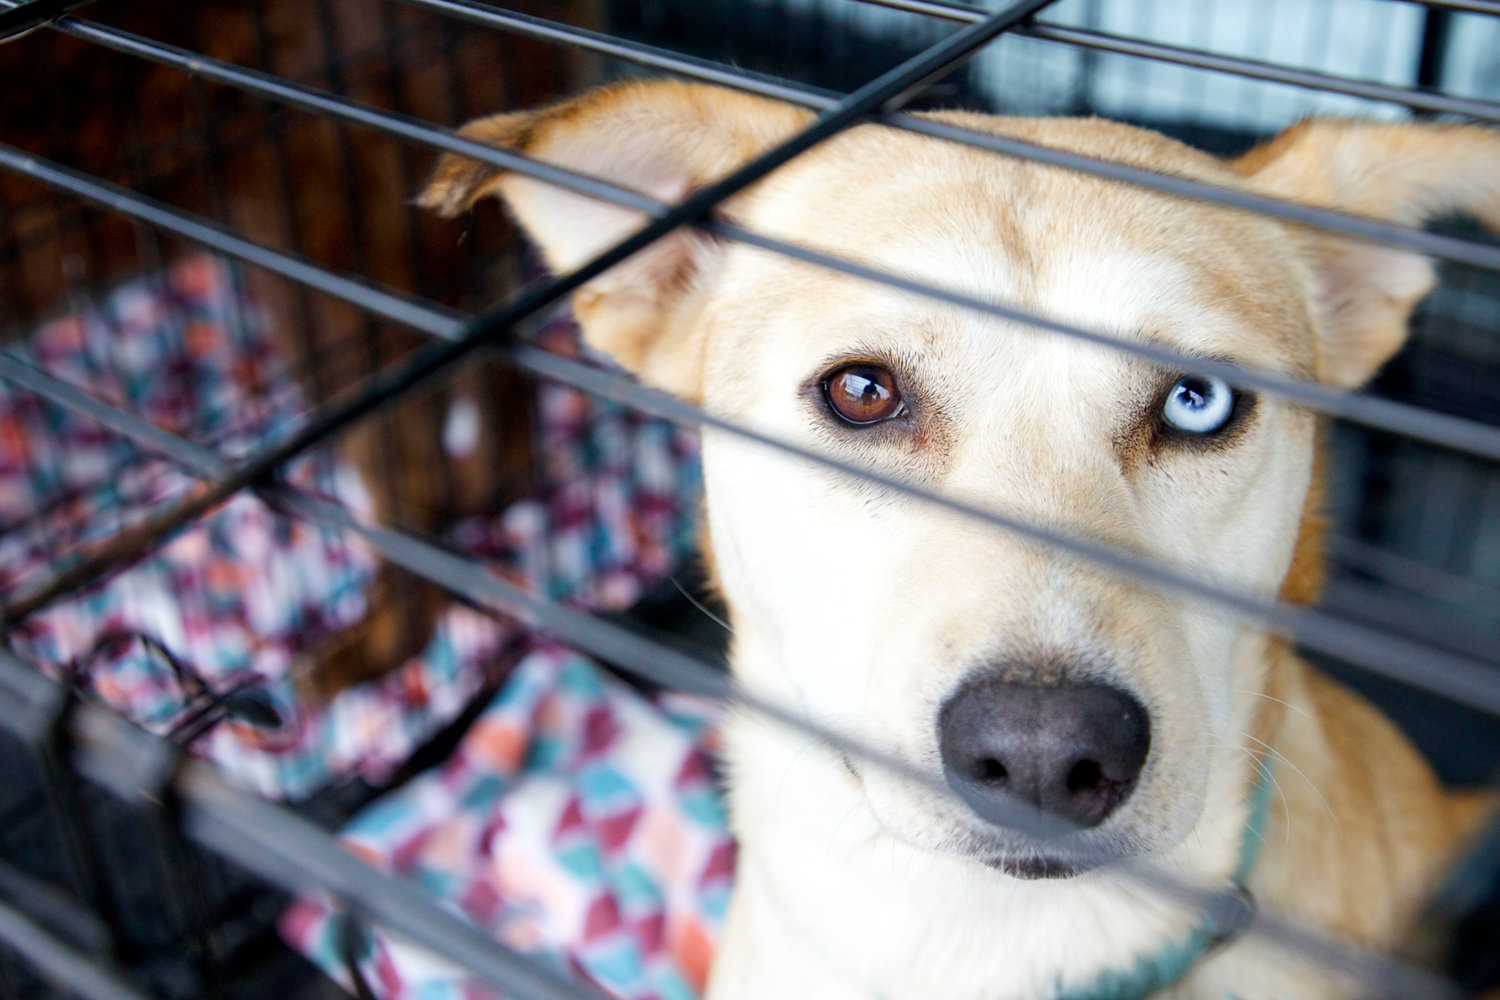 Piper, a 1-year-old labrador-retriever mix with heterochromia, looks at the camera from inside her kennel outside Petsense in Chehalis on Saturday. Piper was rescued from a hoarding situation and was eligible for adoption as of Monday.